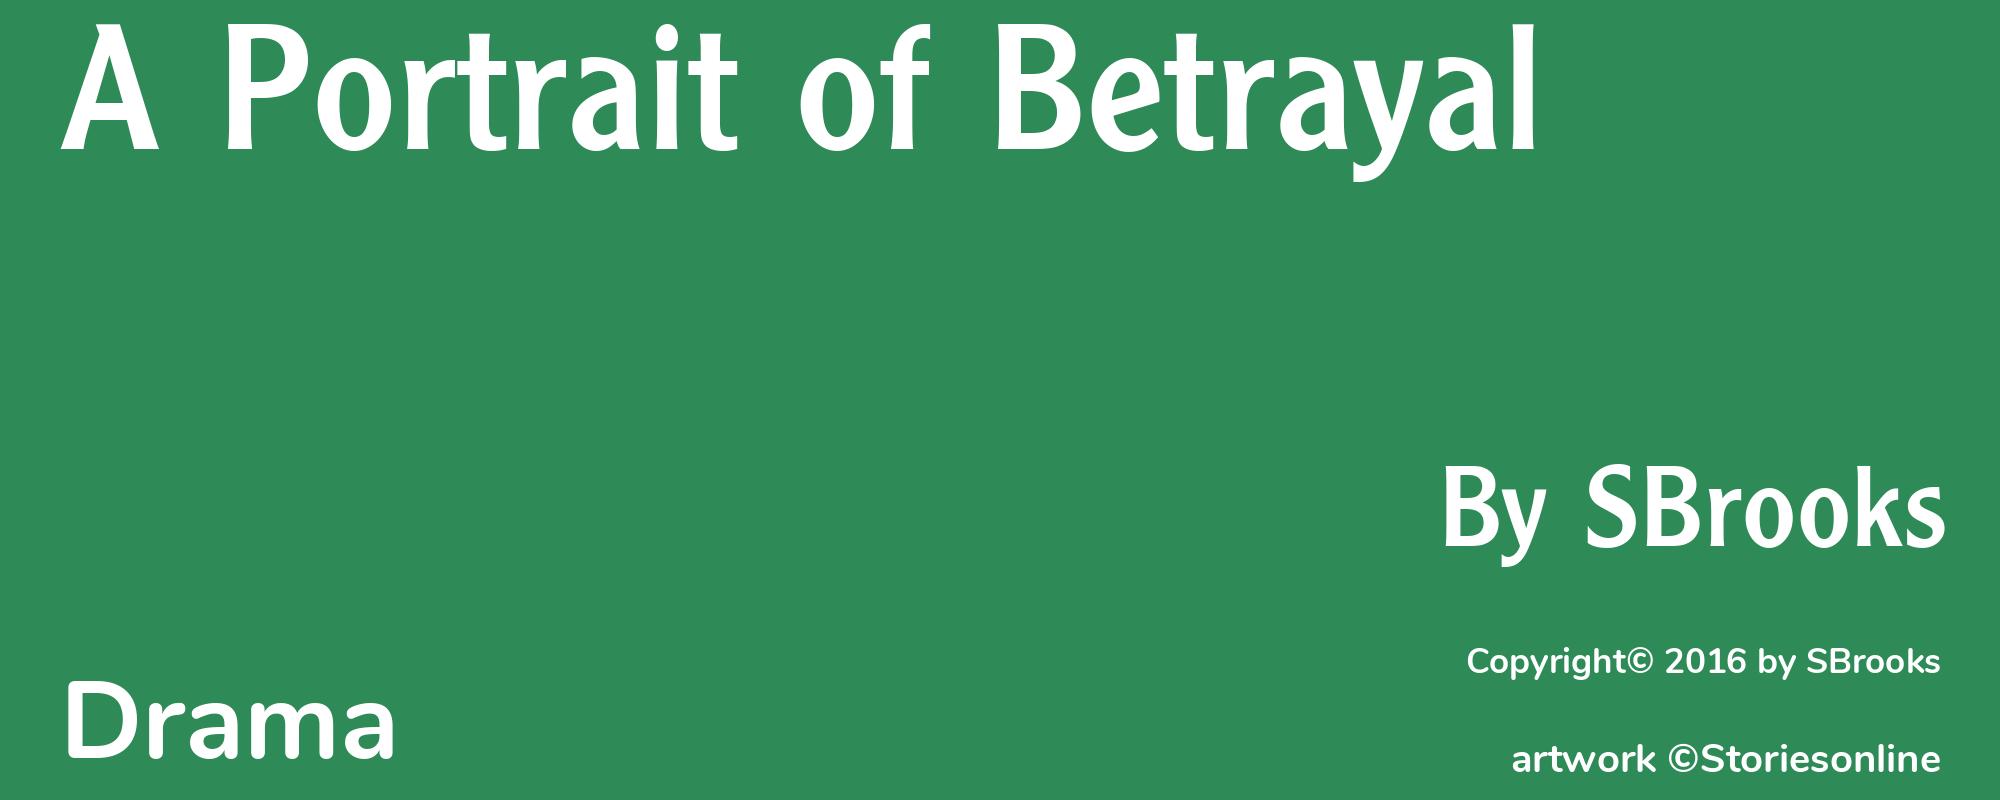 A Portrait of Betrayal - Cover